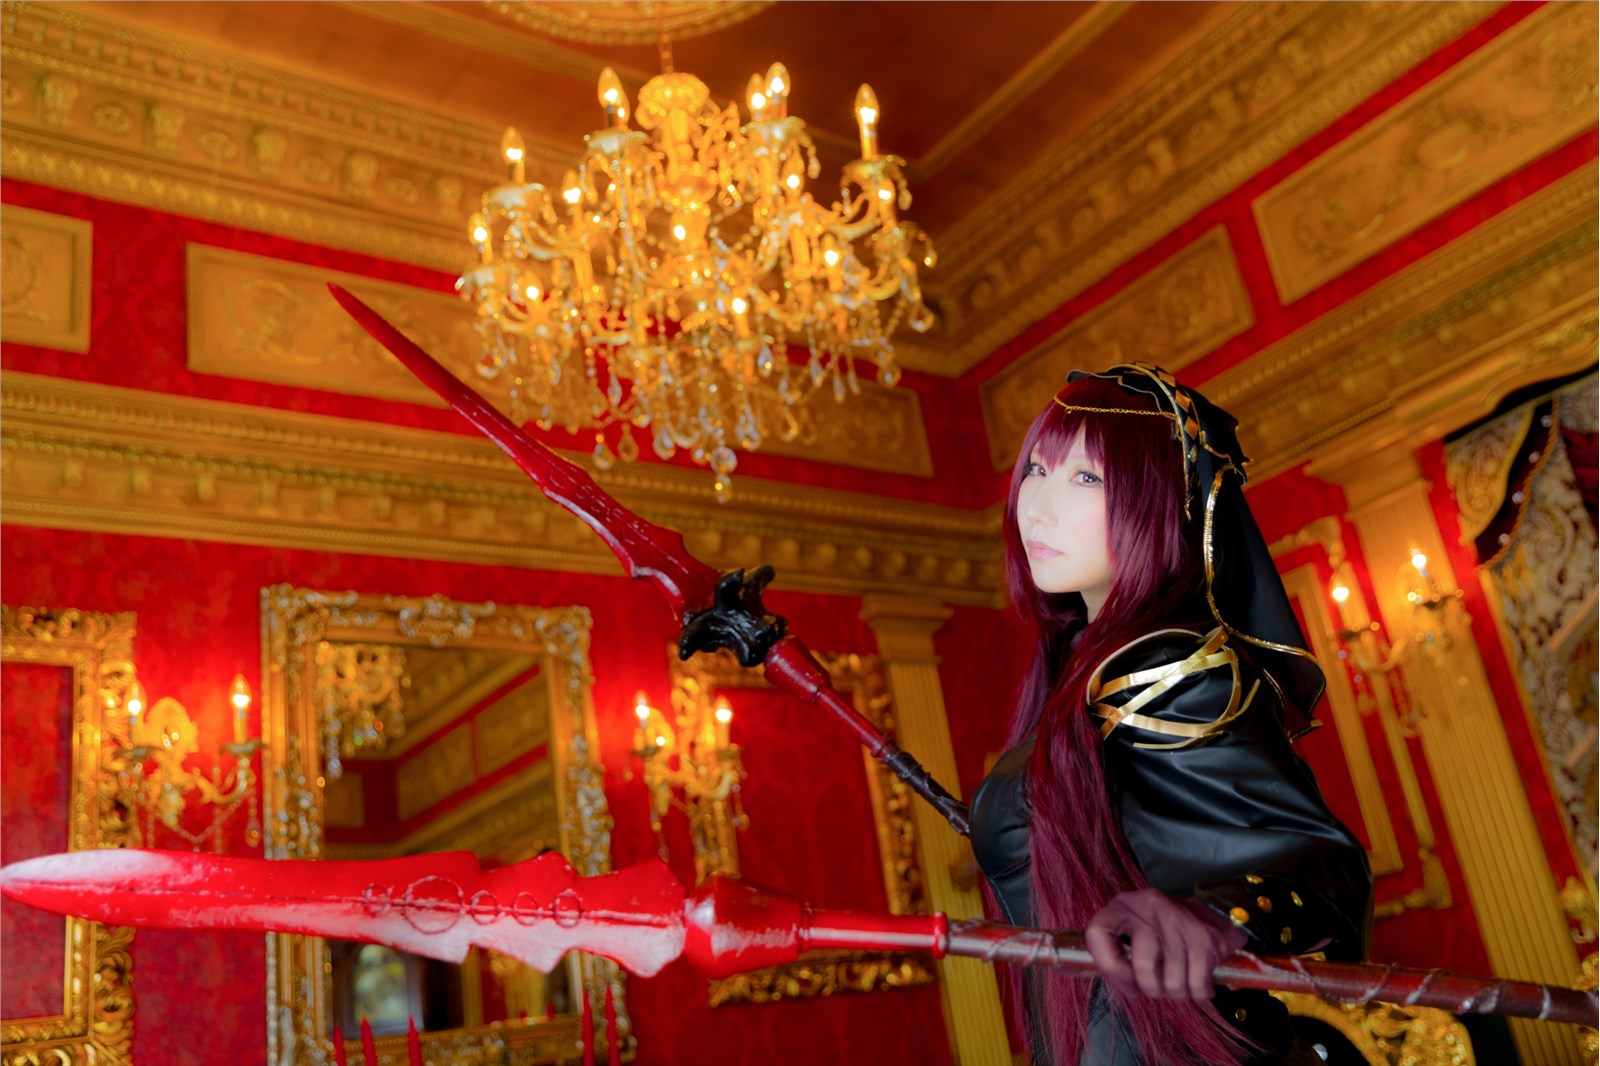 cos (Cosplay)(C92) Shooting Star (サク) Shadow Queen 598MB1(105)